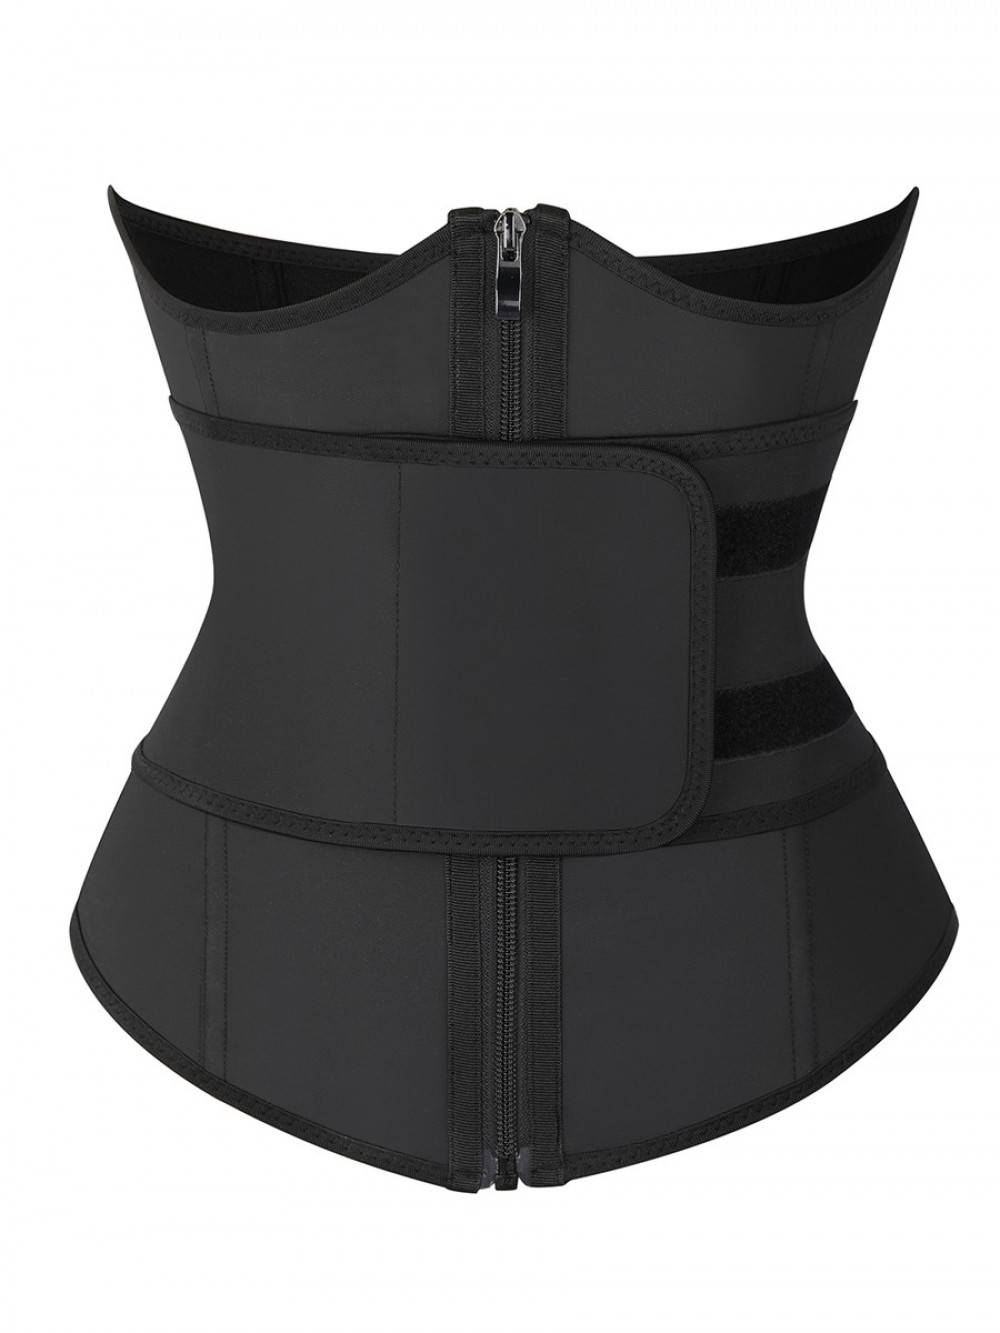 Black Bust Support Latex Waist Trainer With Belt Lose Weight